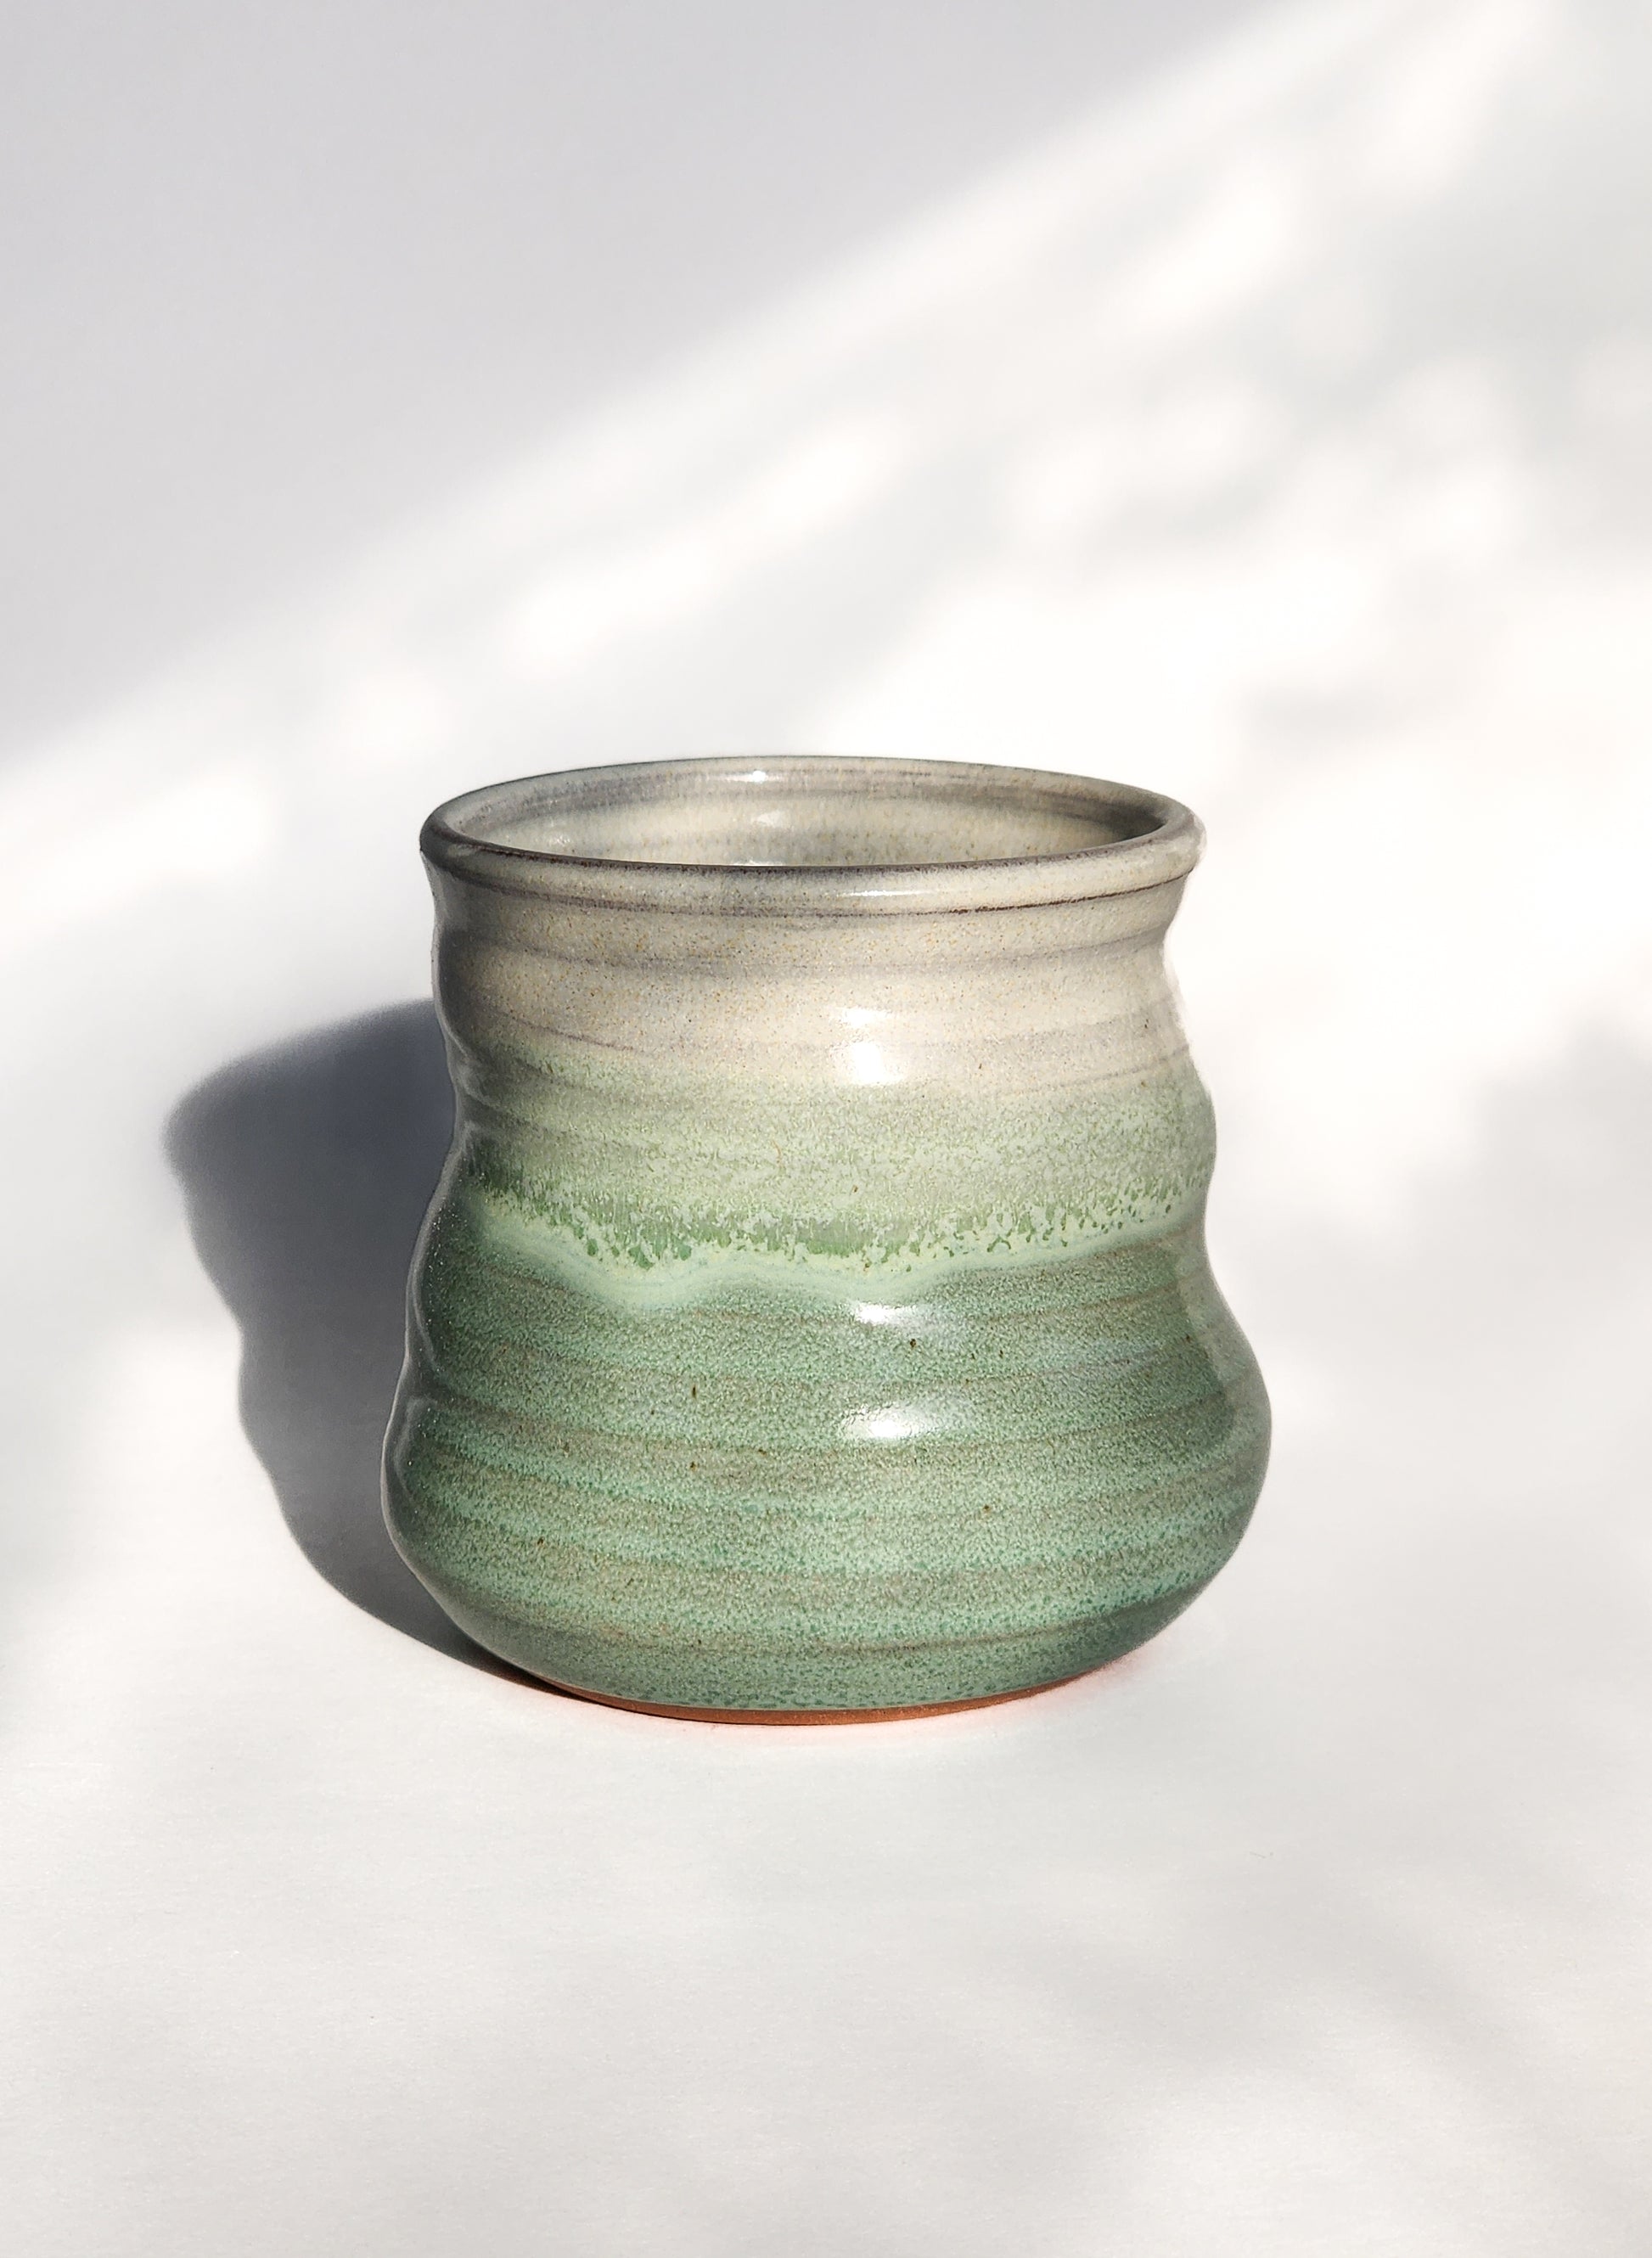 Image: Clinton Pottery's 8 oz Small Tumbler in Light Green – A visually appealing addition with a cool, curvy design for a comfortable grip. This machine washable tumbler, crafted with care, adds contemporary elegance. The invigorating Light Green color brings a touch of nature's vitality, reminiscent of spring foliage and sunlit meadows.